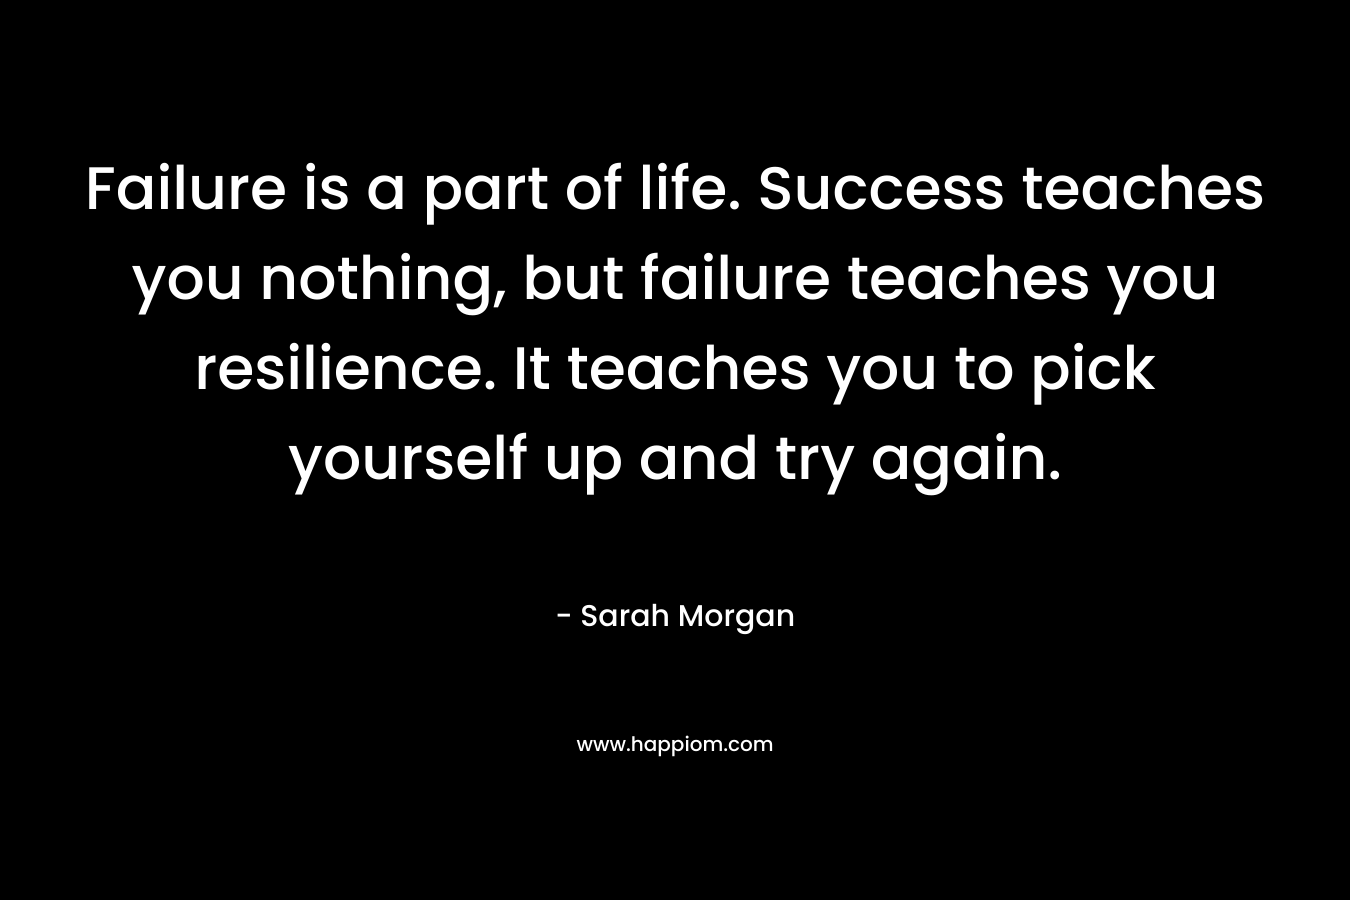 Failure is a part of life. Success teaches you nothing, but failure teaches you resilience. It teaches you to pick yourself up and try again.